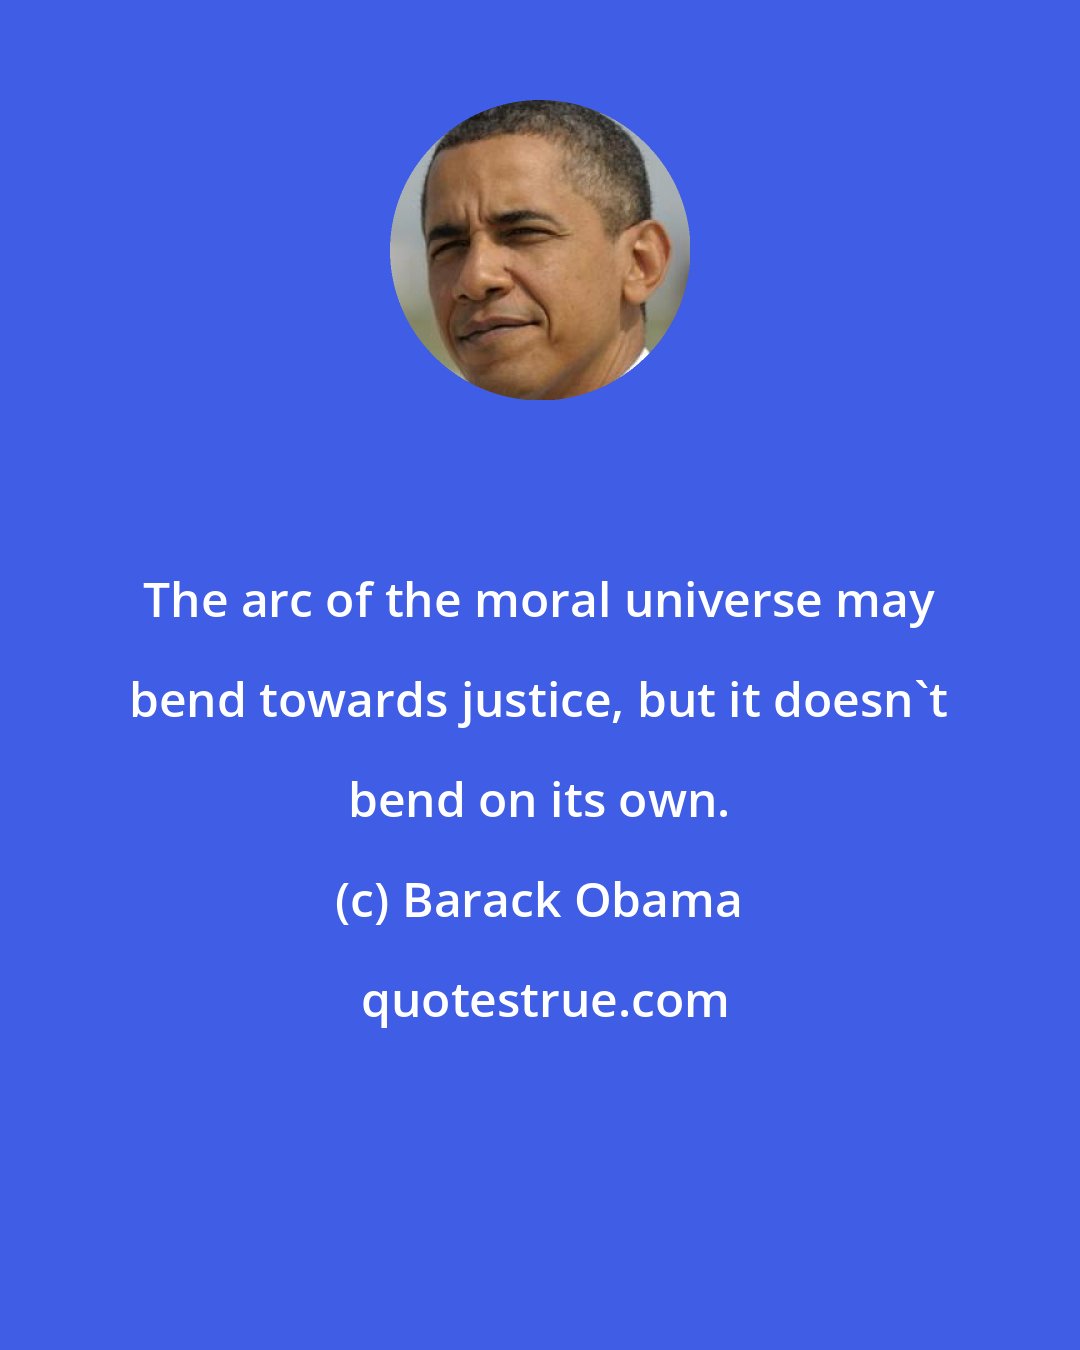 Barack Obama: The arc of the moral universe may bend towards justice, but it doesn't bend on its own.